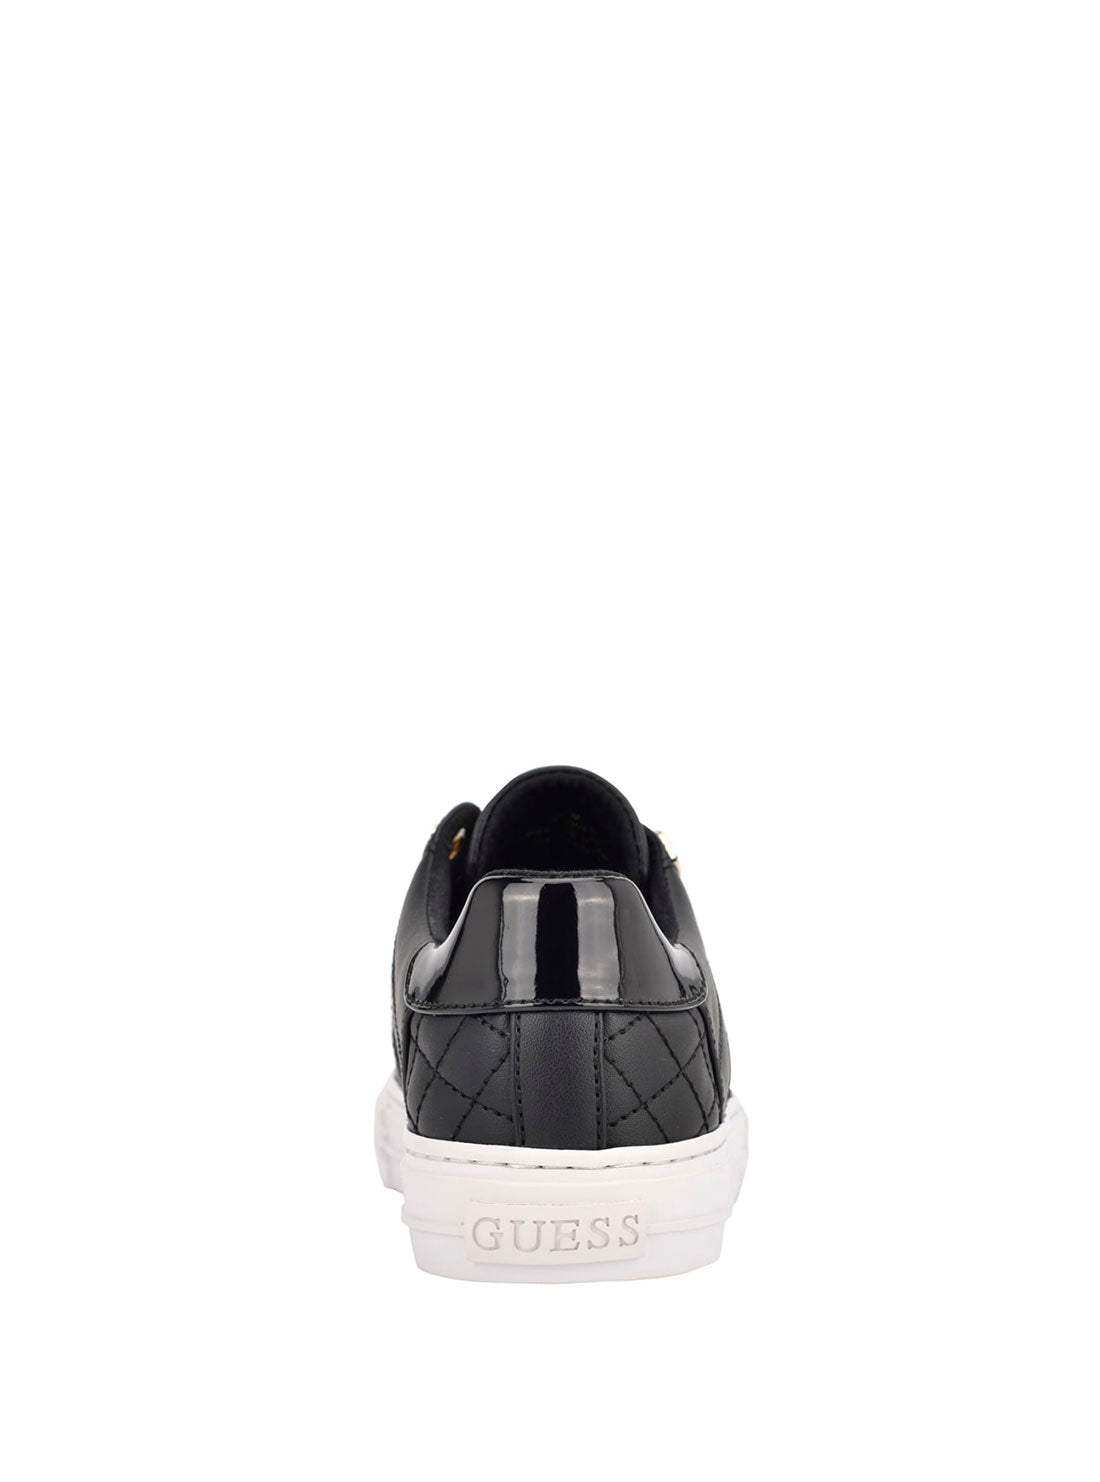 GUESS Black Gold Loven Low-Top Sneakers back view